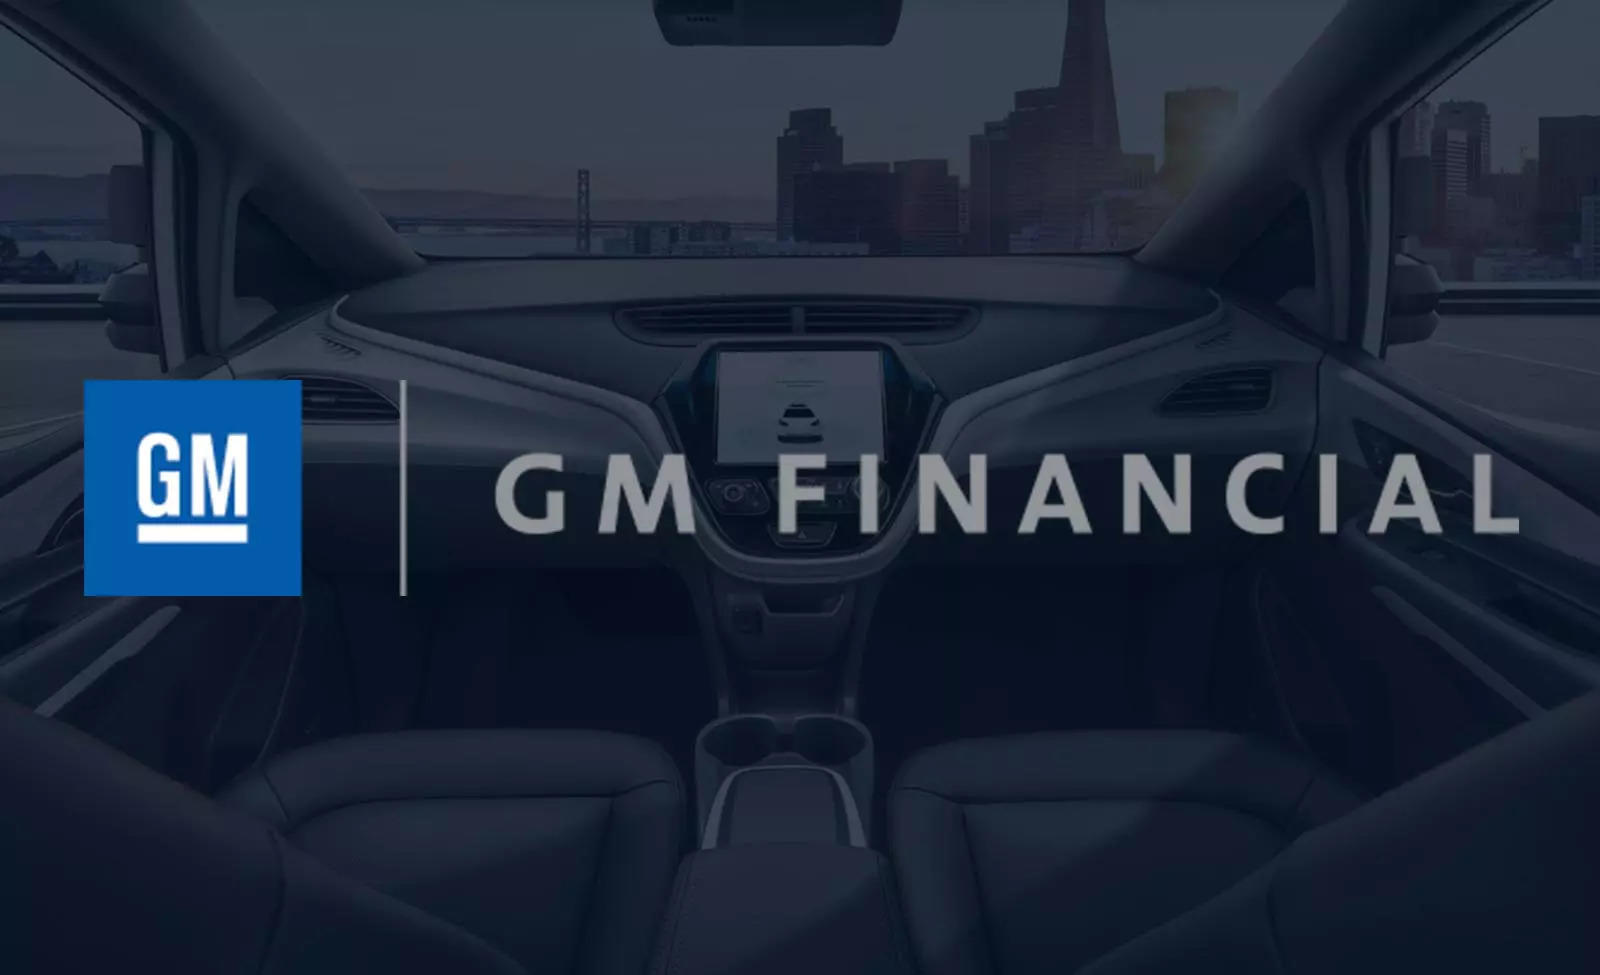 GM Financial to pay over $3.5 mln to resolve claims it violated U.S. law